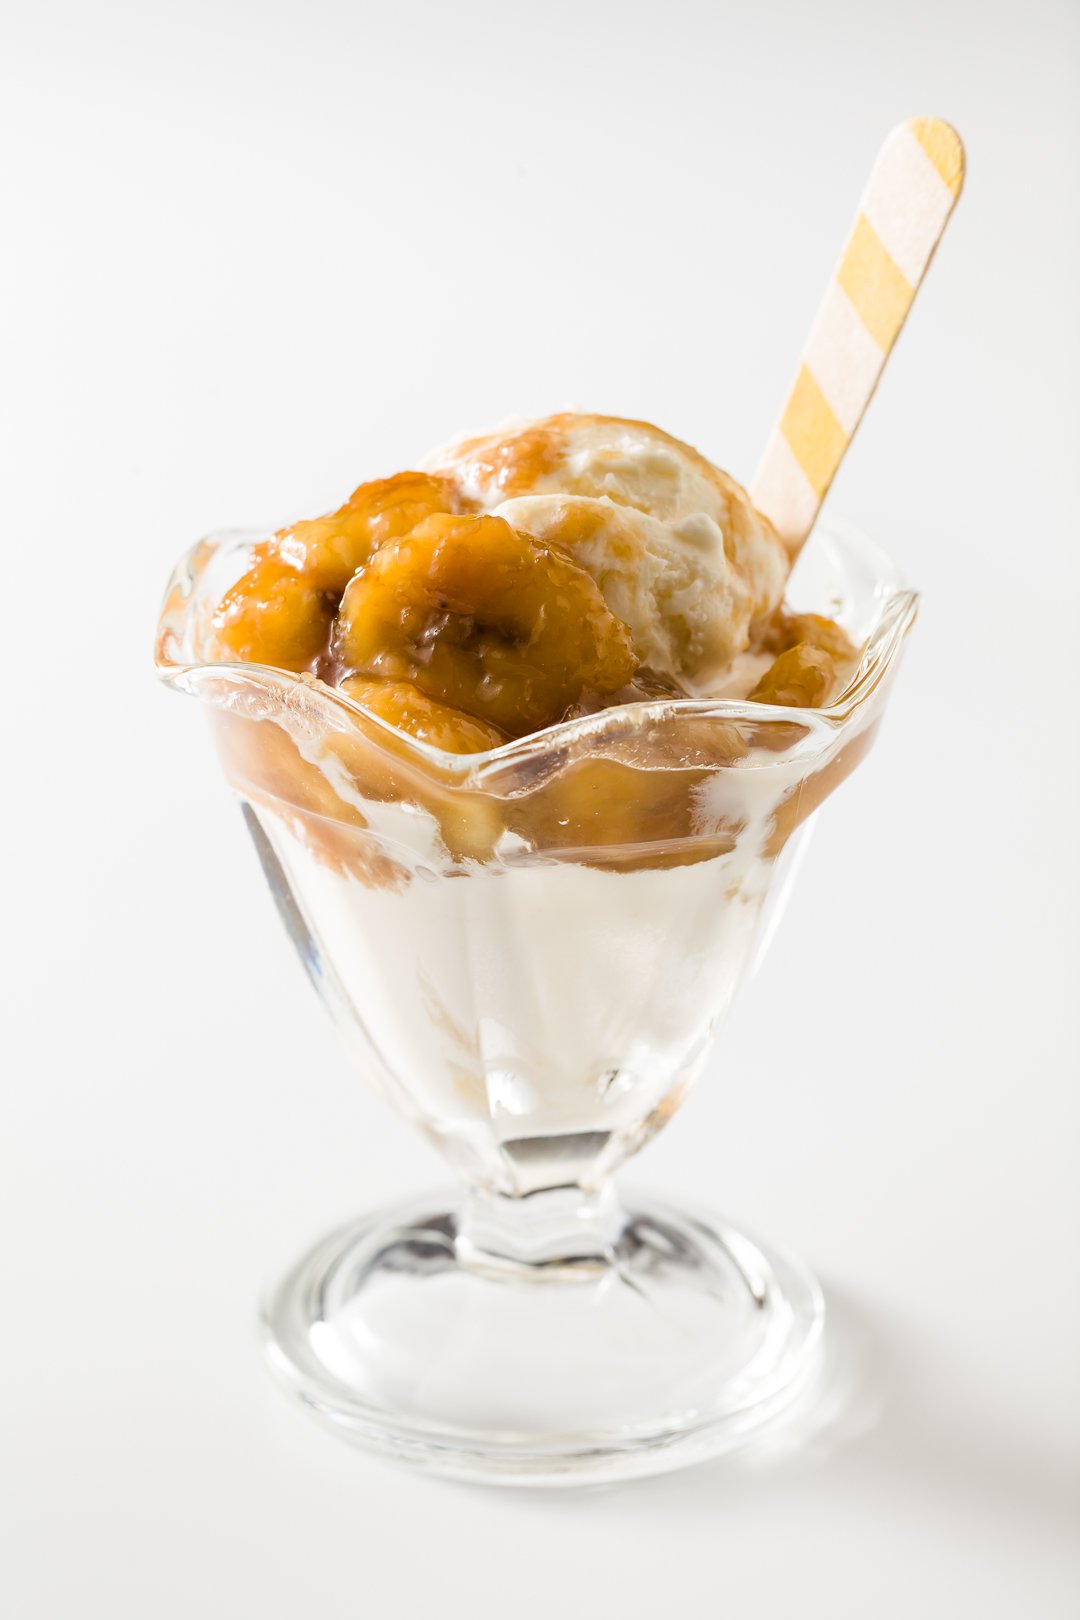 Caramelized bananas over vanilla ice cream in a glass dish with a spoon